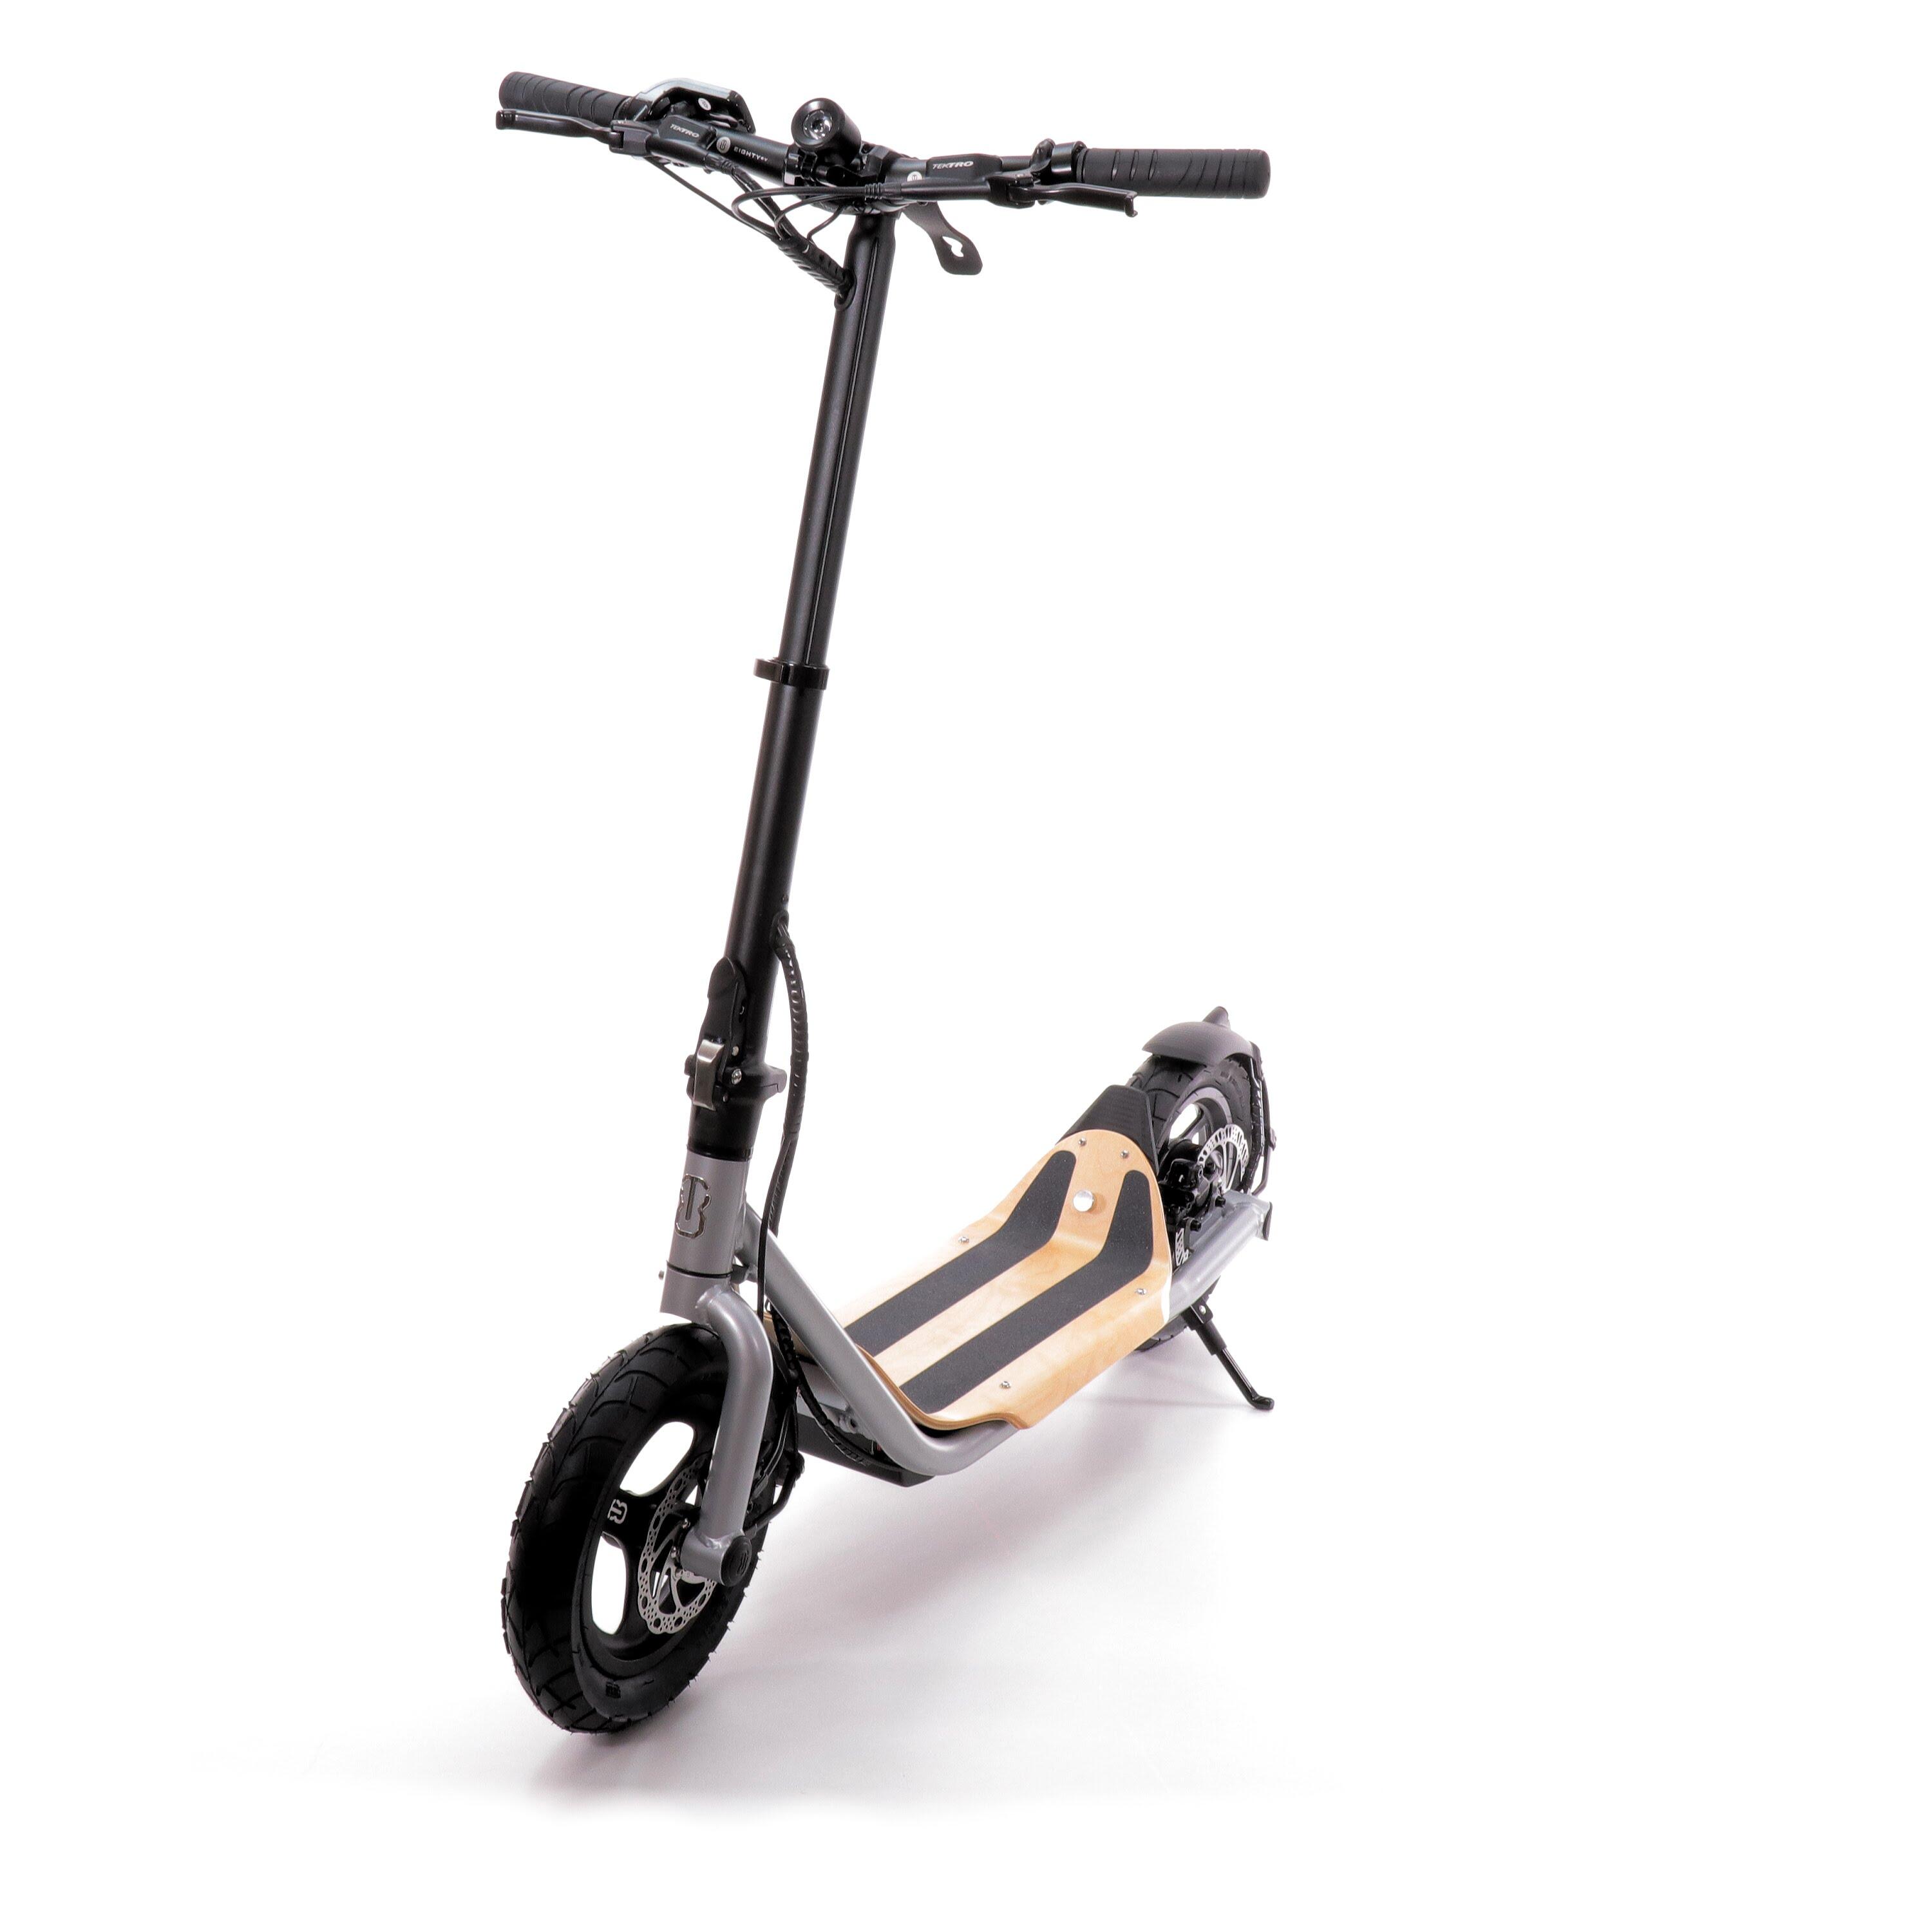 8Tev Adult Electric Scooter, B12 Proxi, Silver 1/5